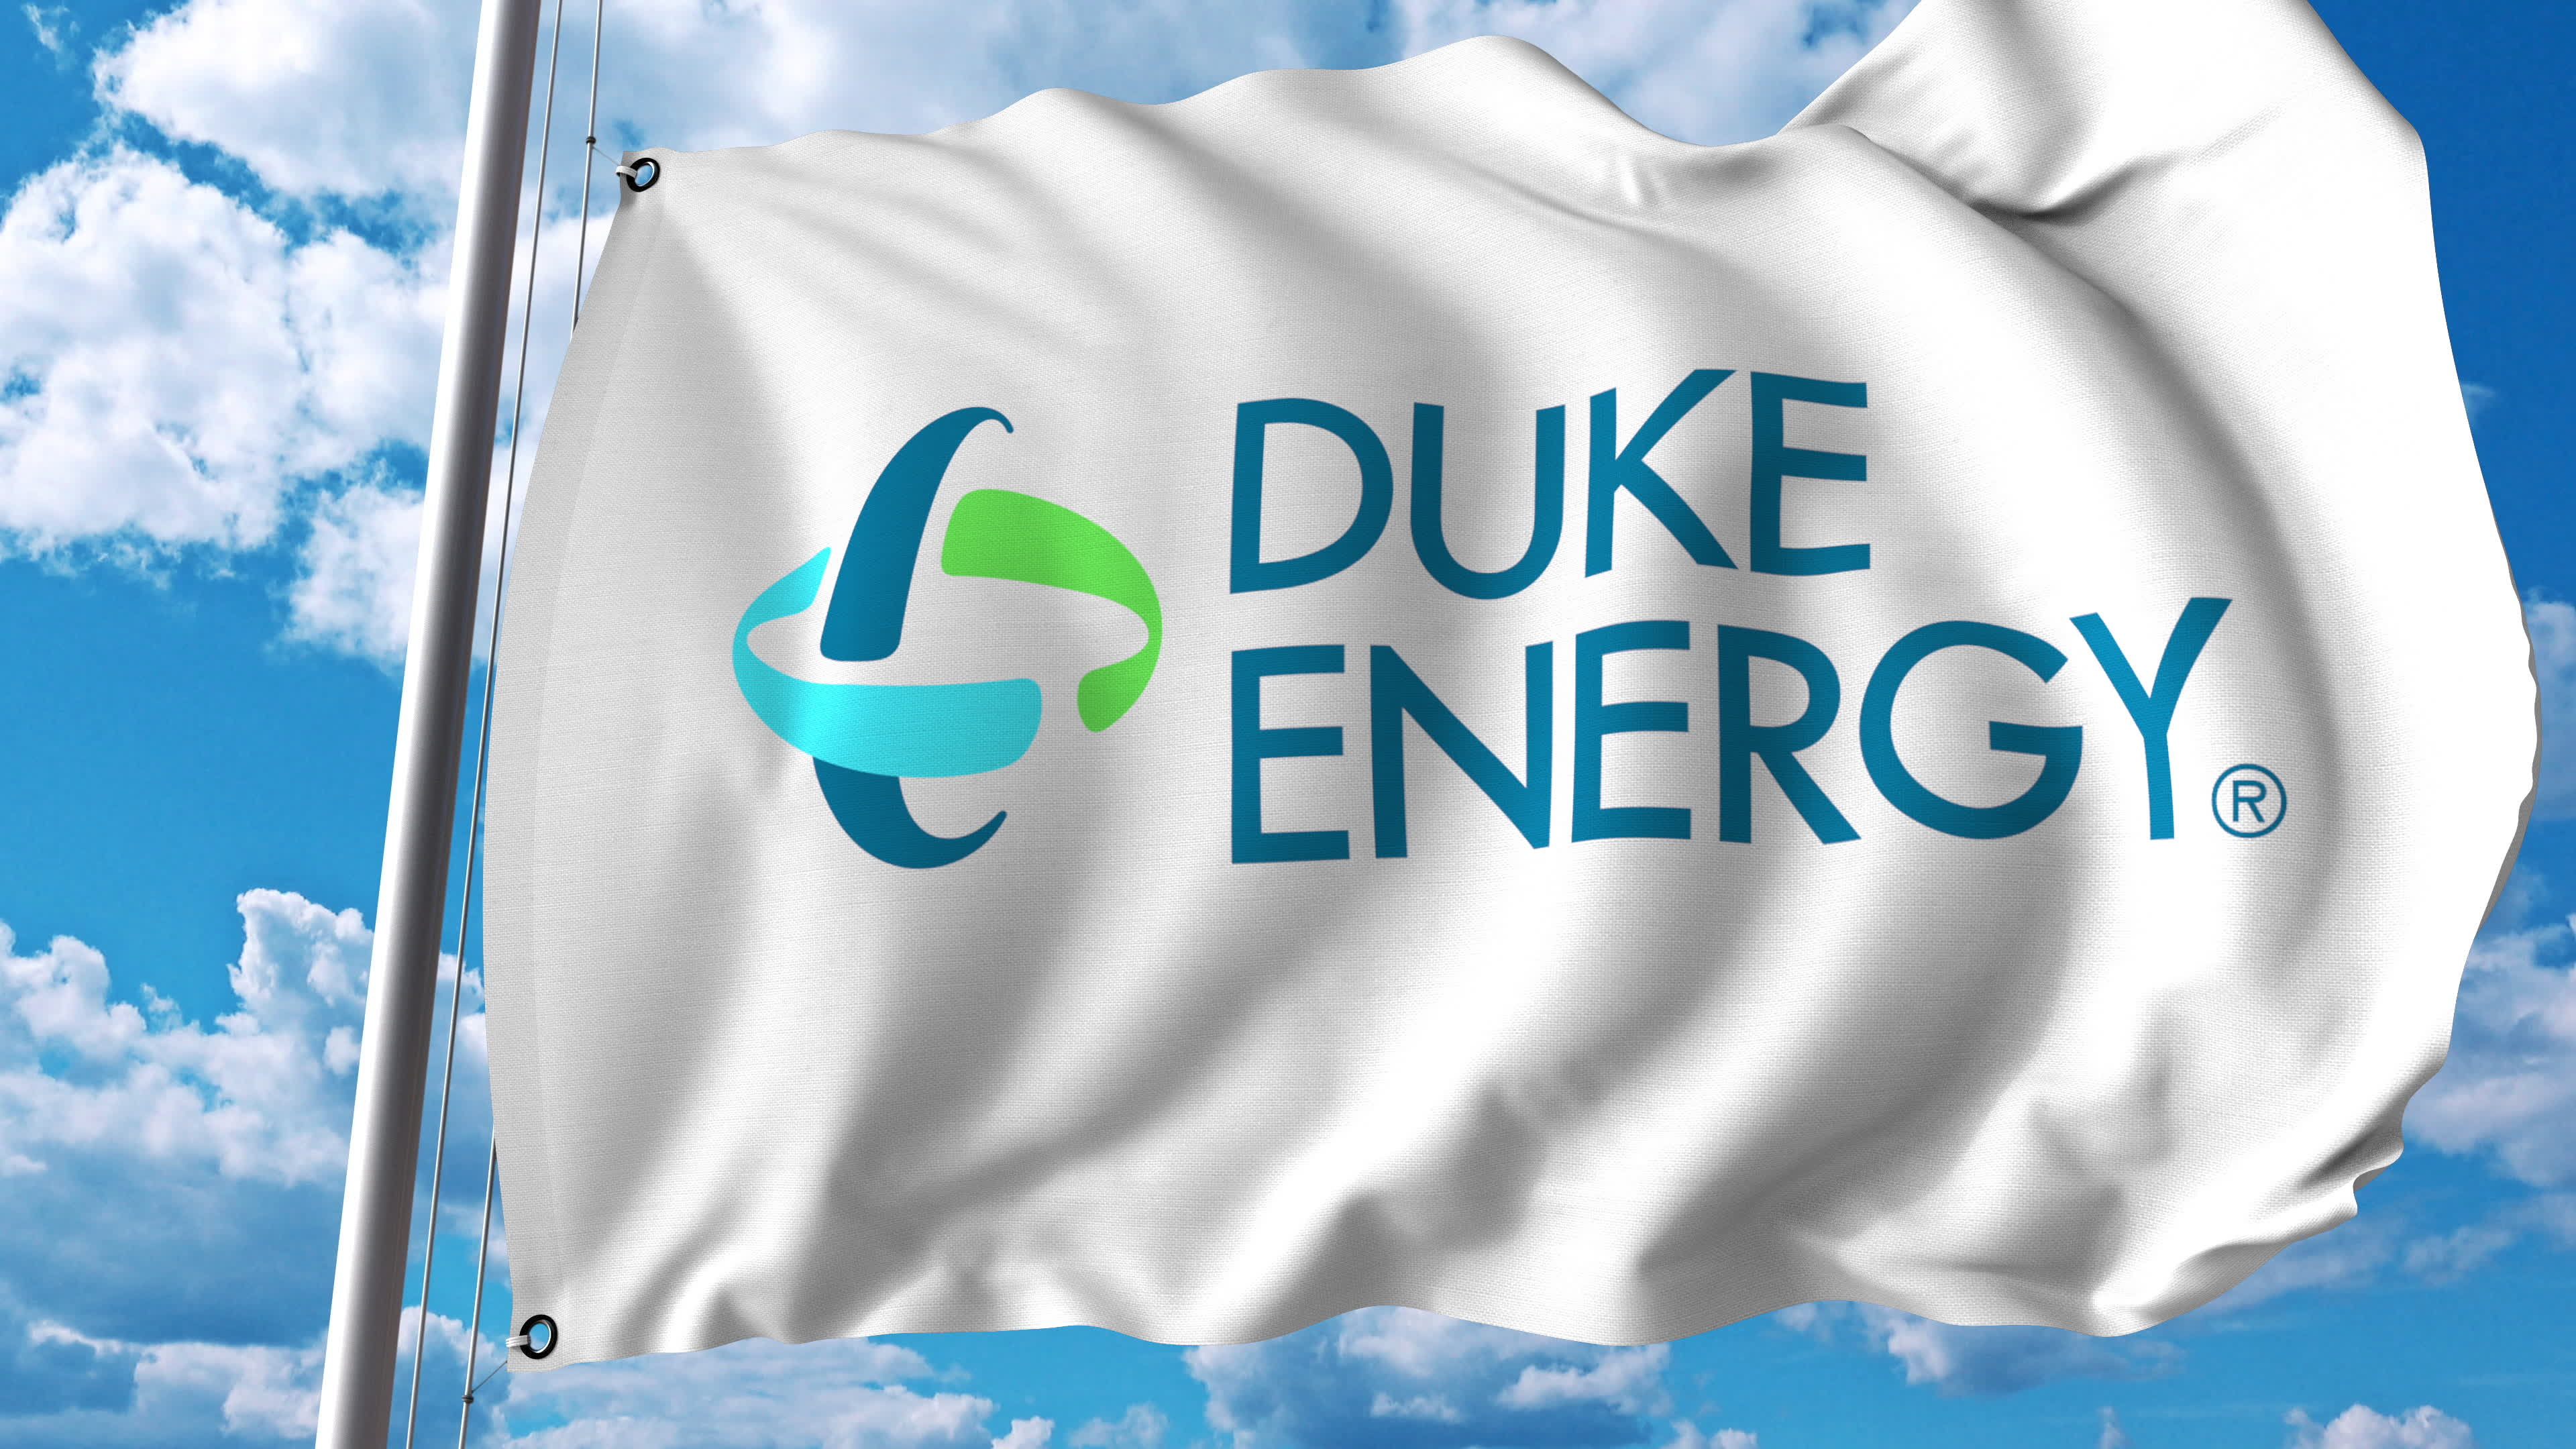 What Kind Of Energy Does Duke Energy Use